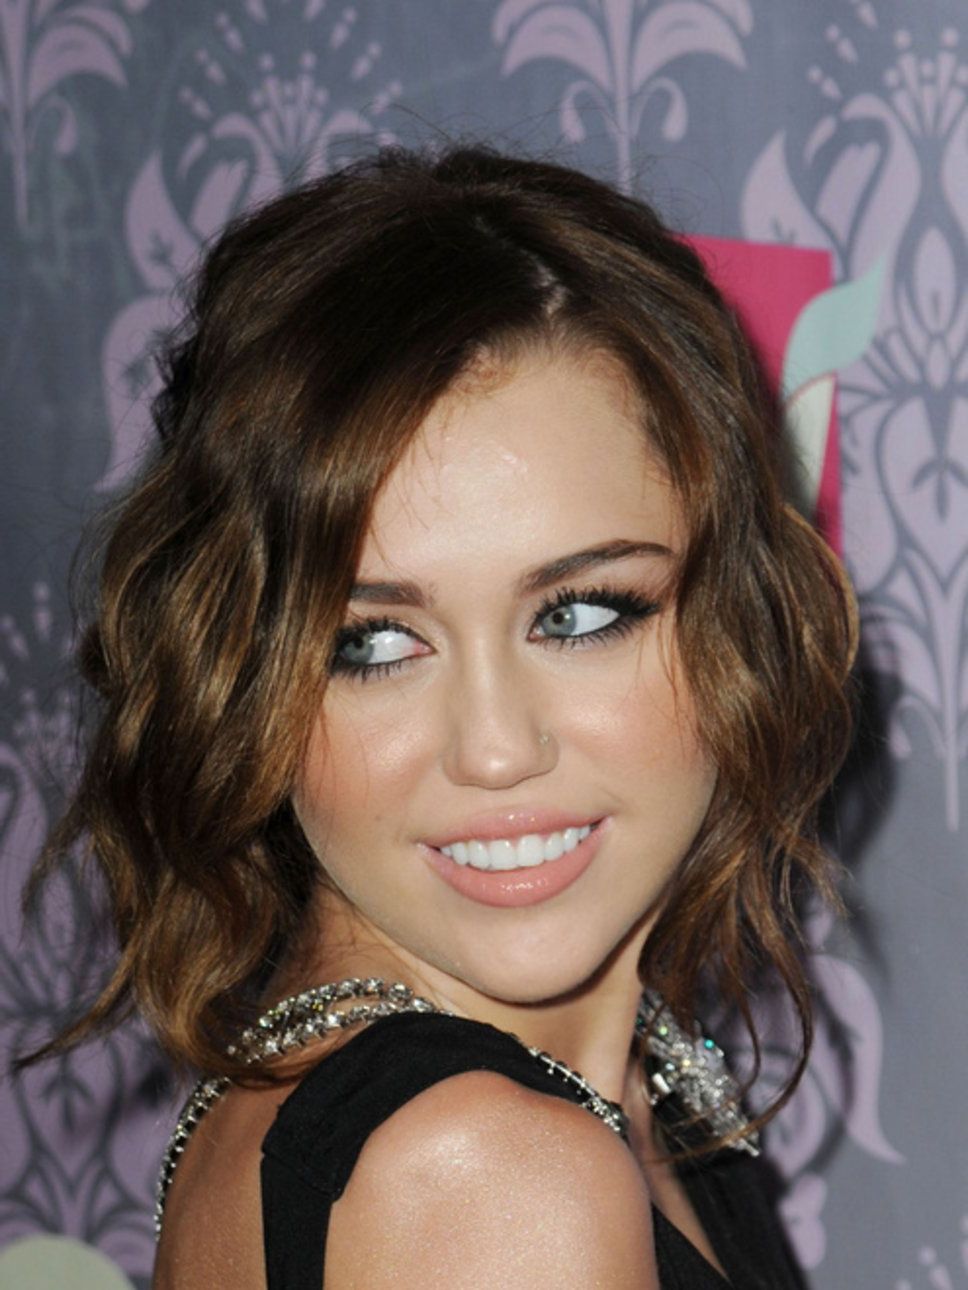 Short Bob Hairstyles: Formal Prom Curly Updo Hairstyle Pictures With Semi Short Layered Hairstyles (View 24 of 25)